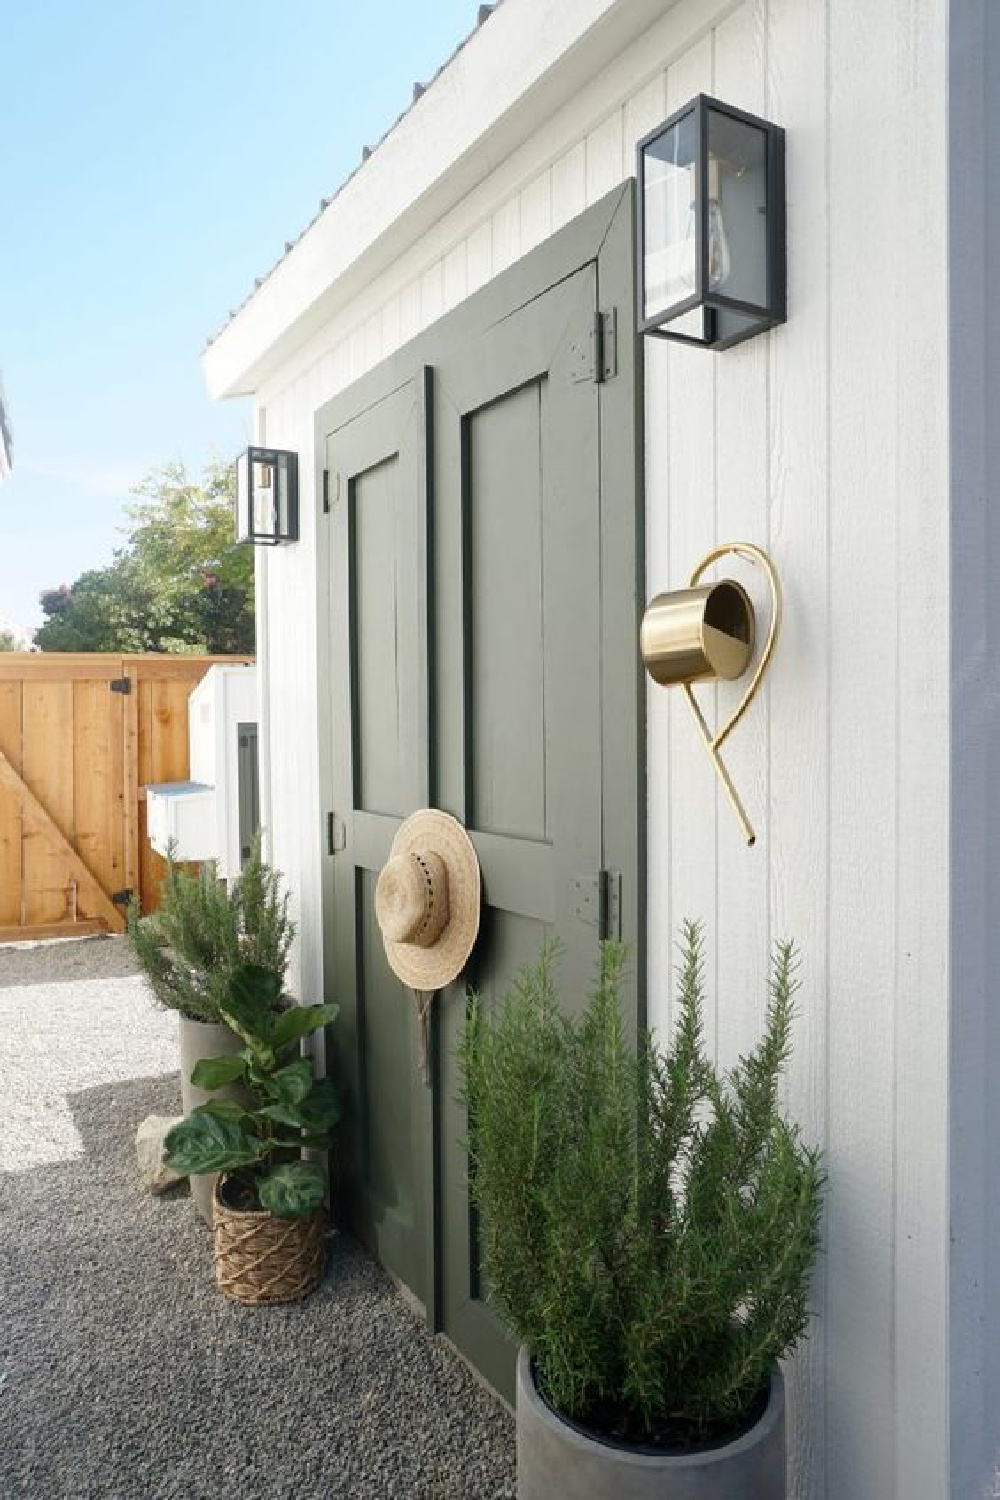 Benjamin Moore Swiss Coffee white paint color on shed exterior - Almified. #swisscoffee #whitepaintcolors #houseexteriors